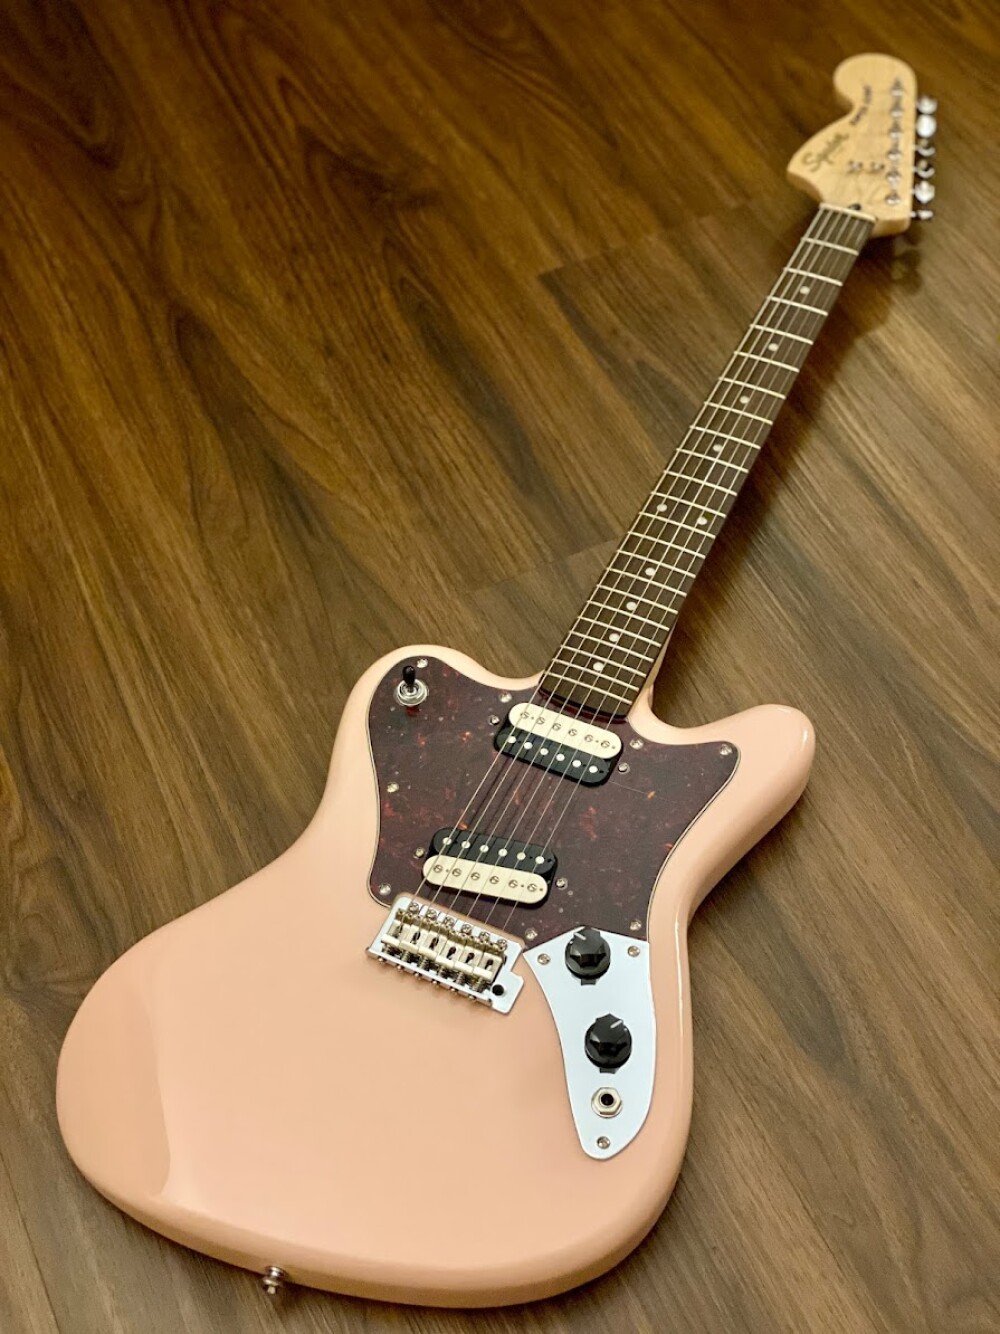 Squier Paranormal Super-Sonic in Shell Pink with Tortoiseshell